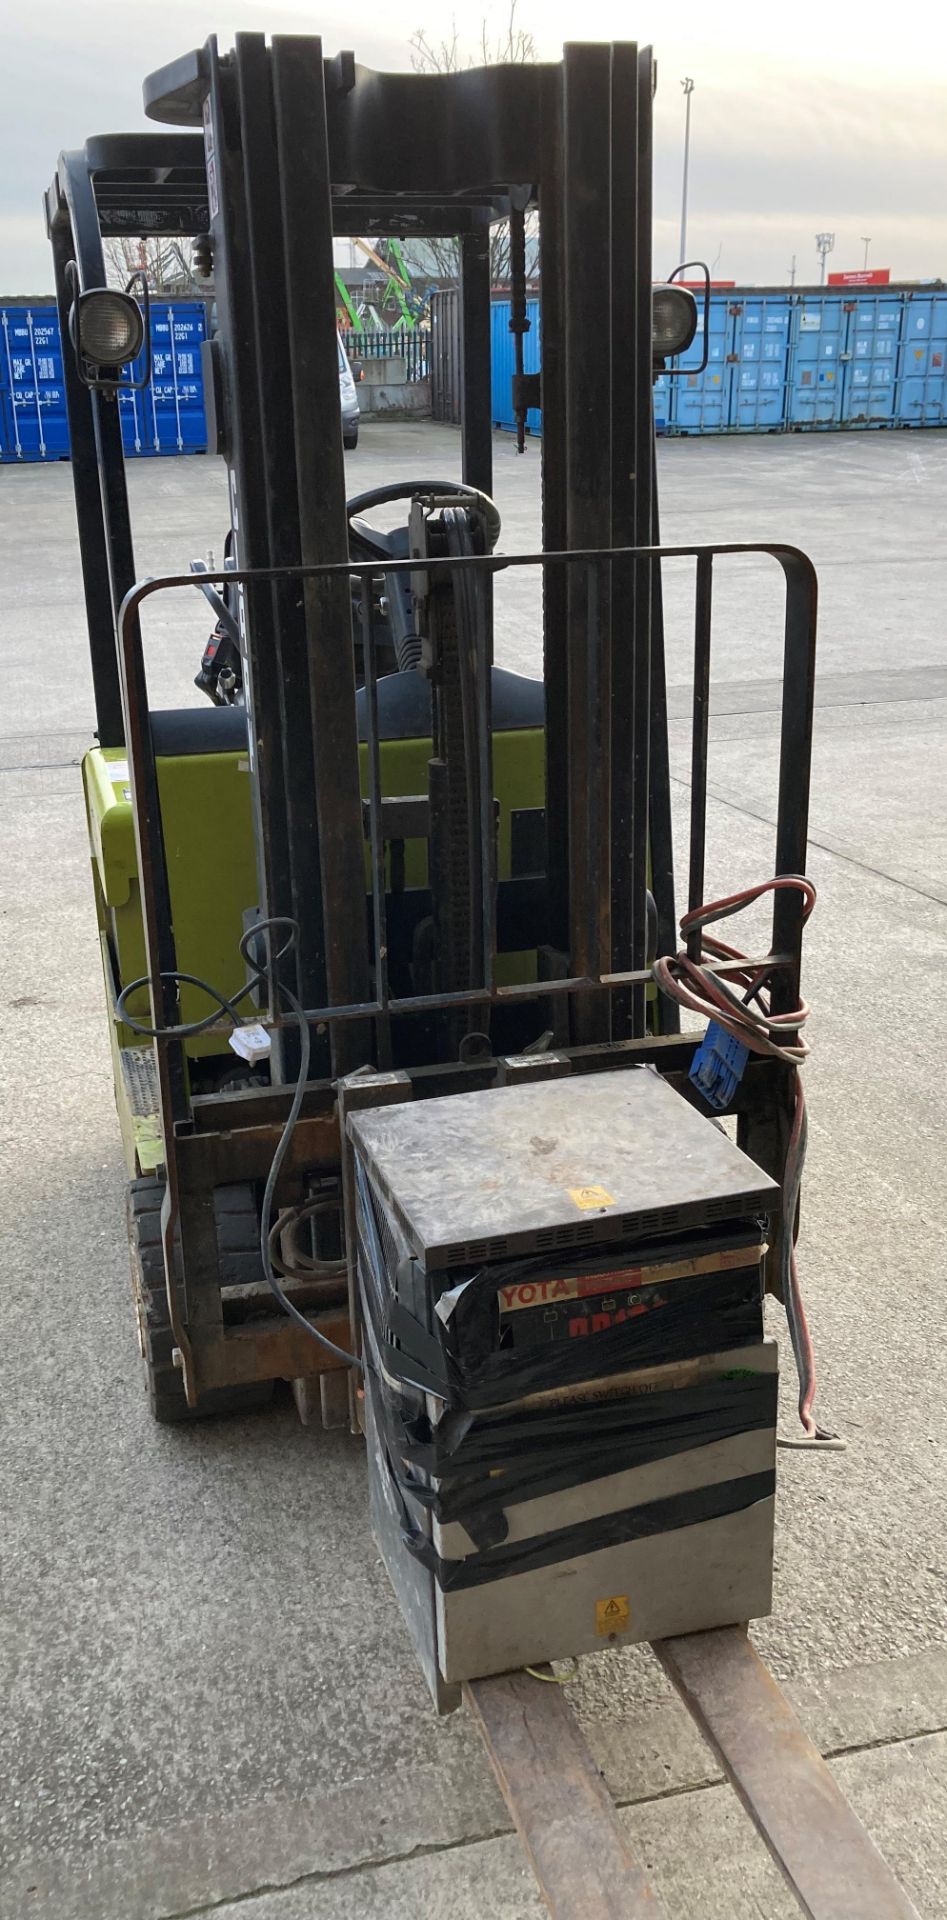 CLARK ELECTRIC FORK TRUCK - MODEL: TMX15C. Fitted with side shift - green. Capacity: 1500kg. - Image 7 of 9